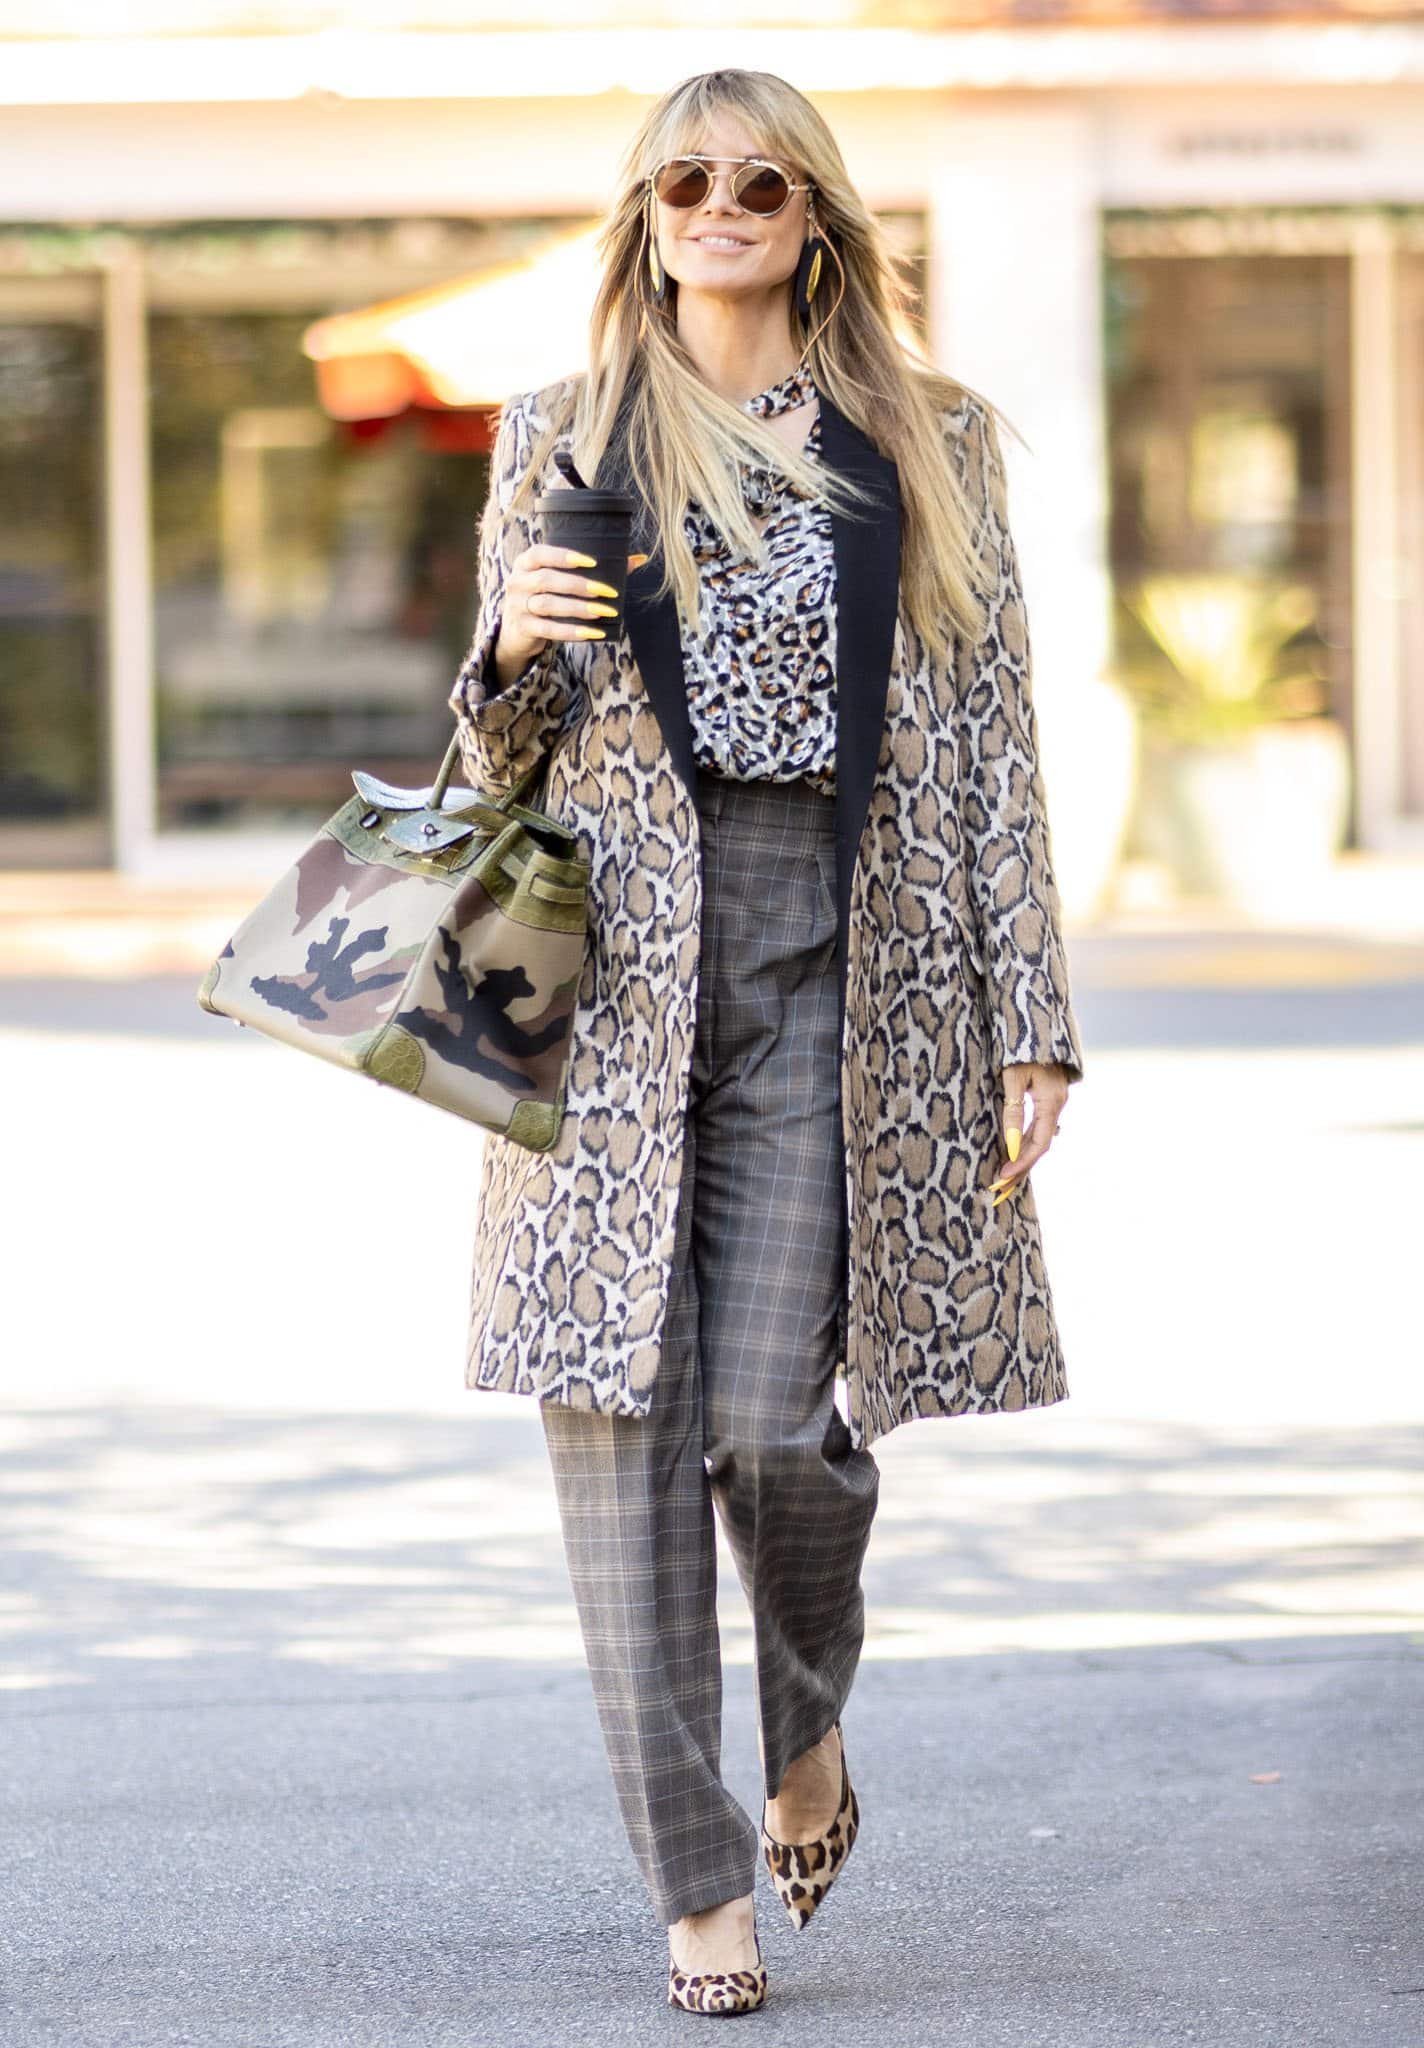 How to Wear Animal Print Shoes: 8 Easy Styling Tips